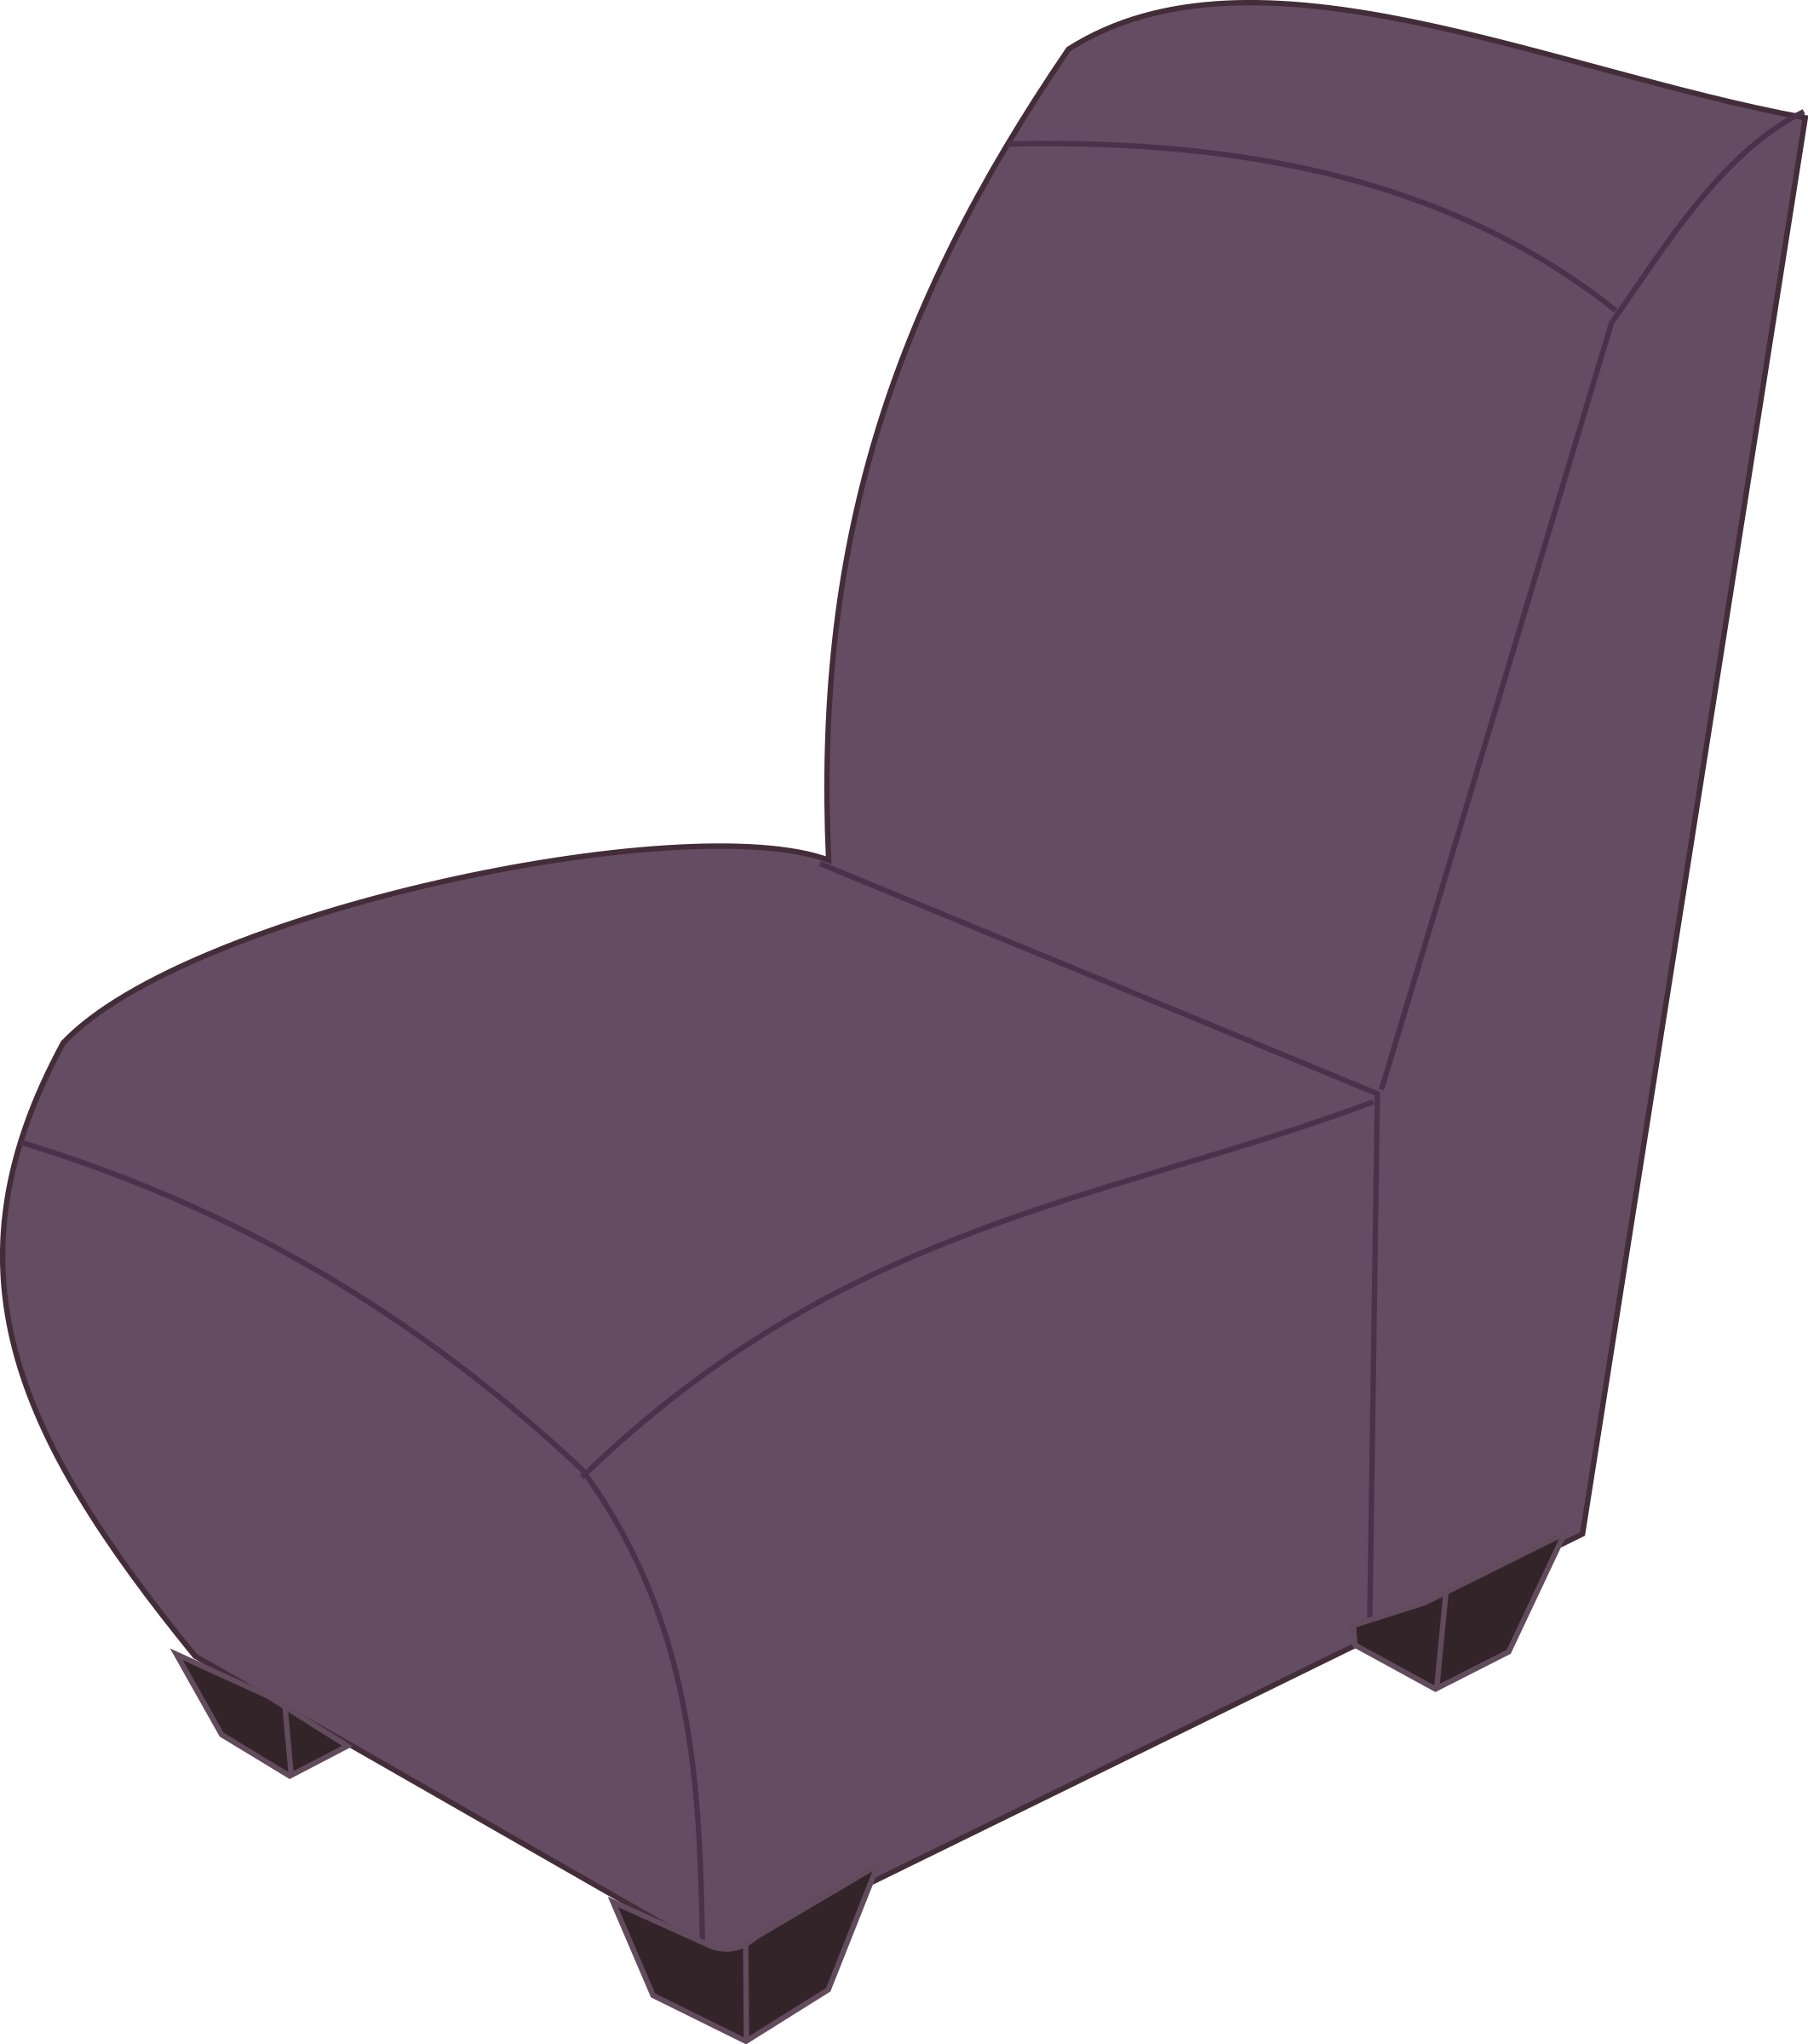 chairs clipart images - photo #39